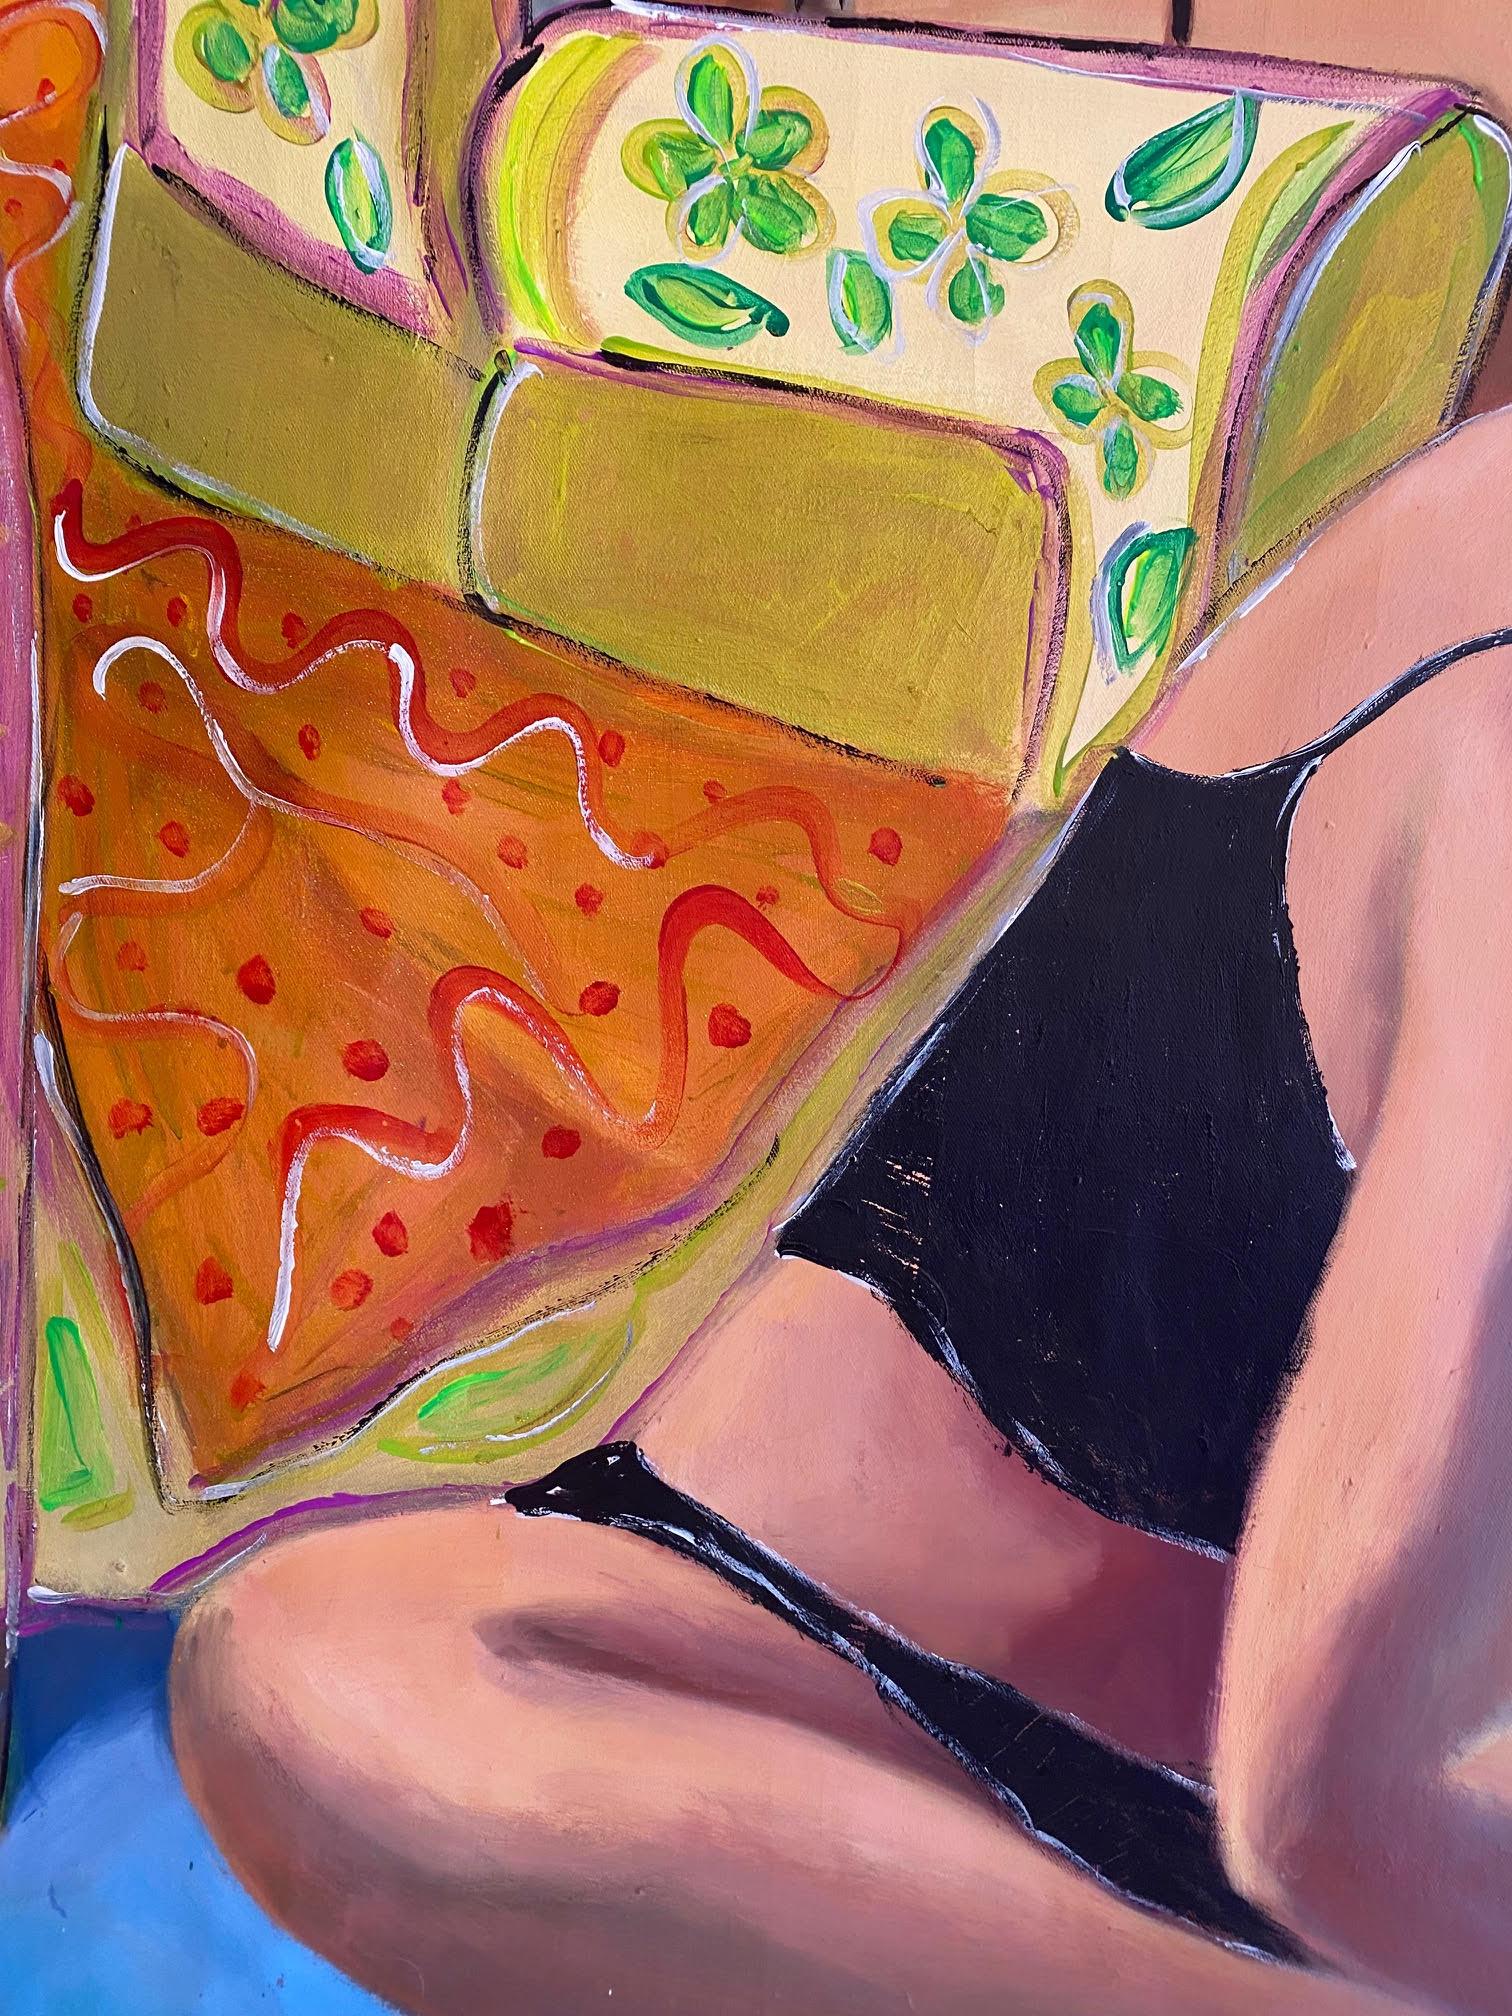 ‘A Young Woman In Yoga Class’ Figurative Art Oil On Canvas by Frida - Contemporary Painting by Frida Willis